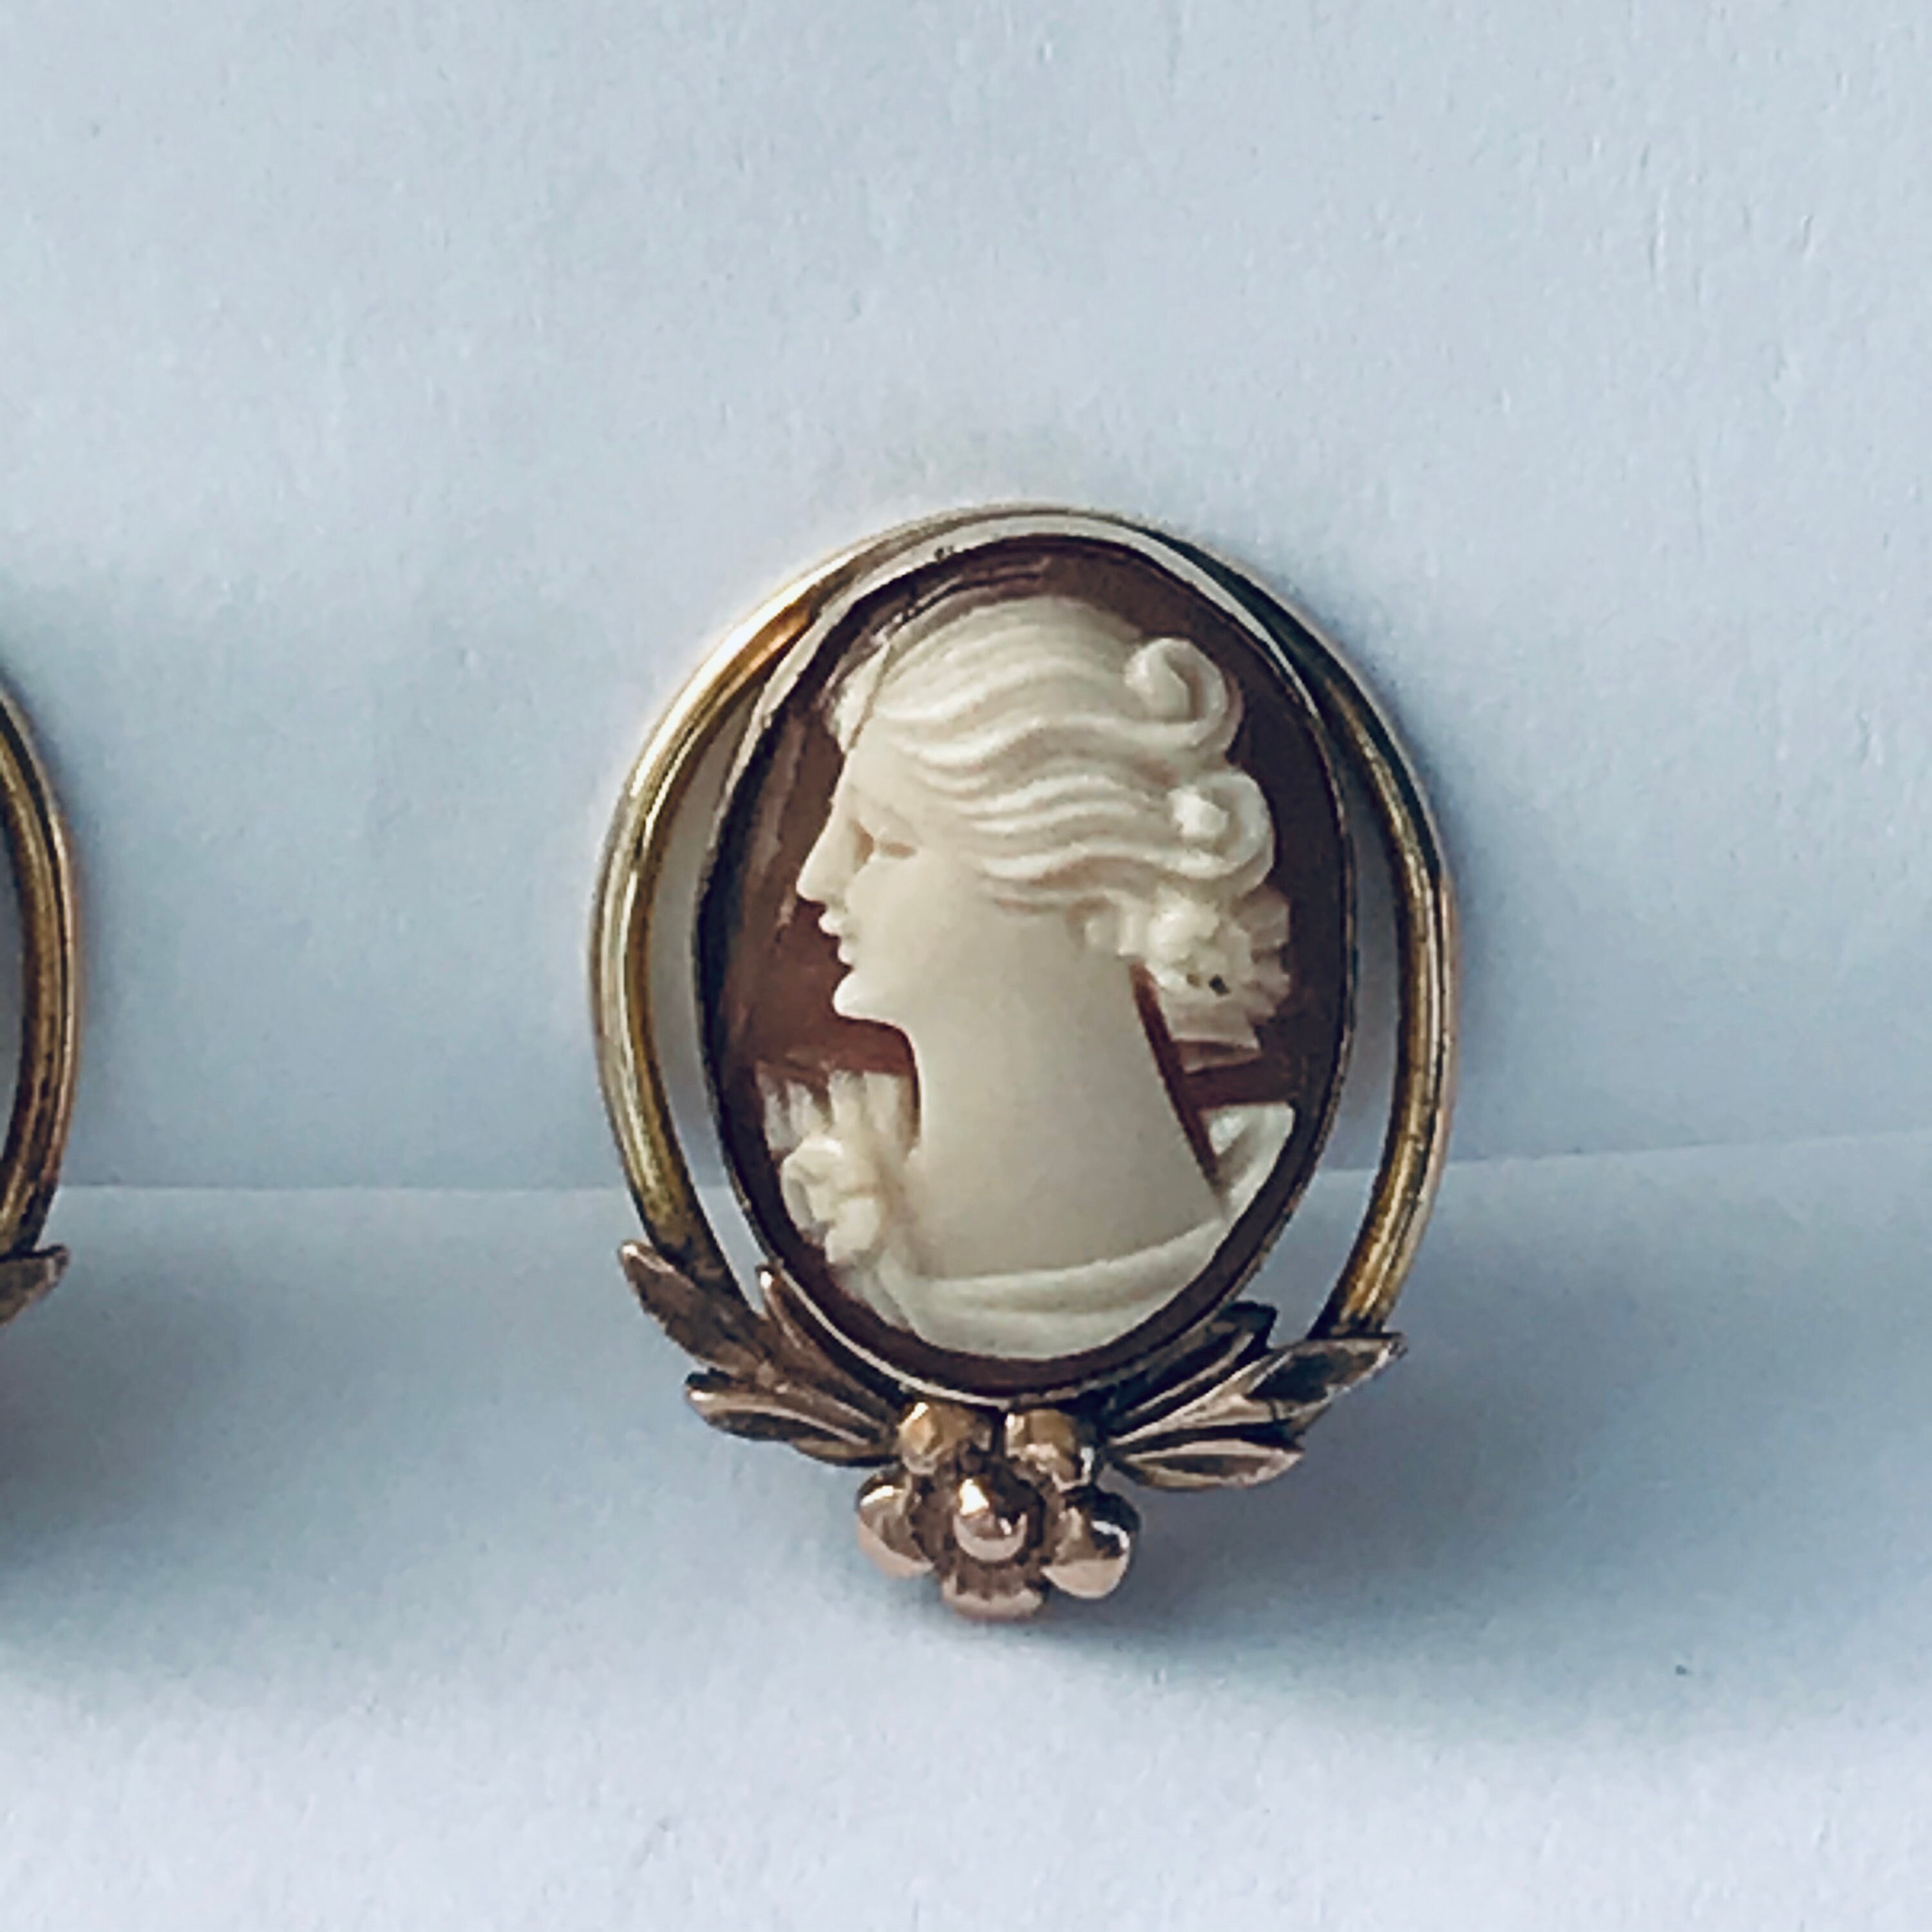 Vintage Cameo Earrings Hand Carved Shell in 12K Gold Filled | Etsy